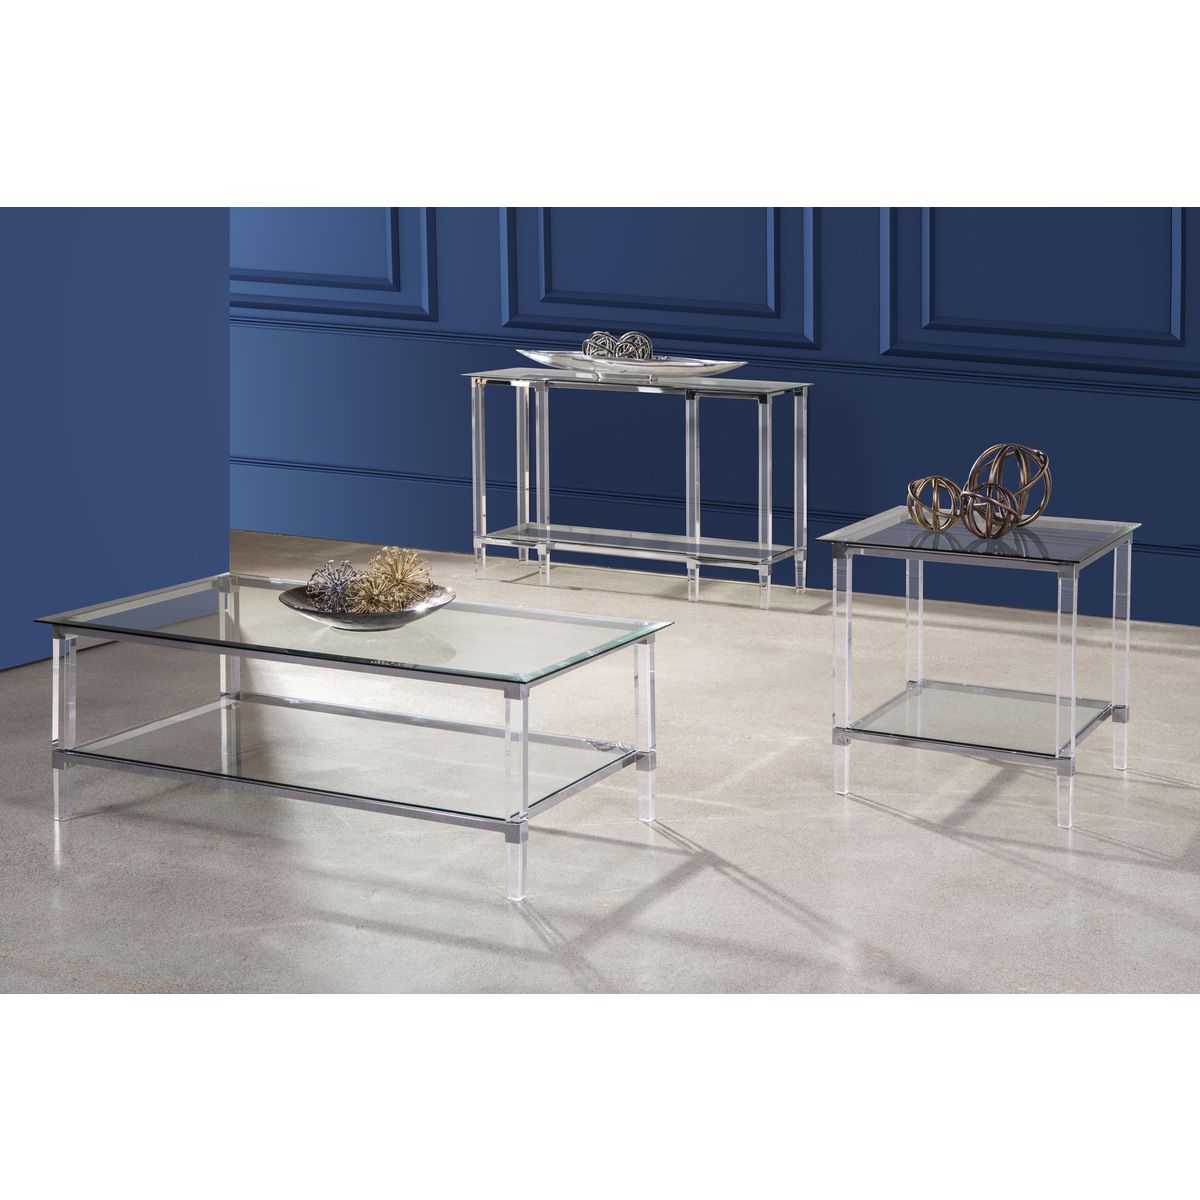 3656 05rec Rectangular Sofa Table With Acrylic Legs Inside 2020 Acrylic Modern Console Tables (View 6 of 10)